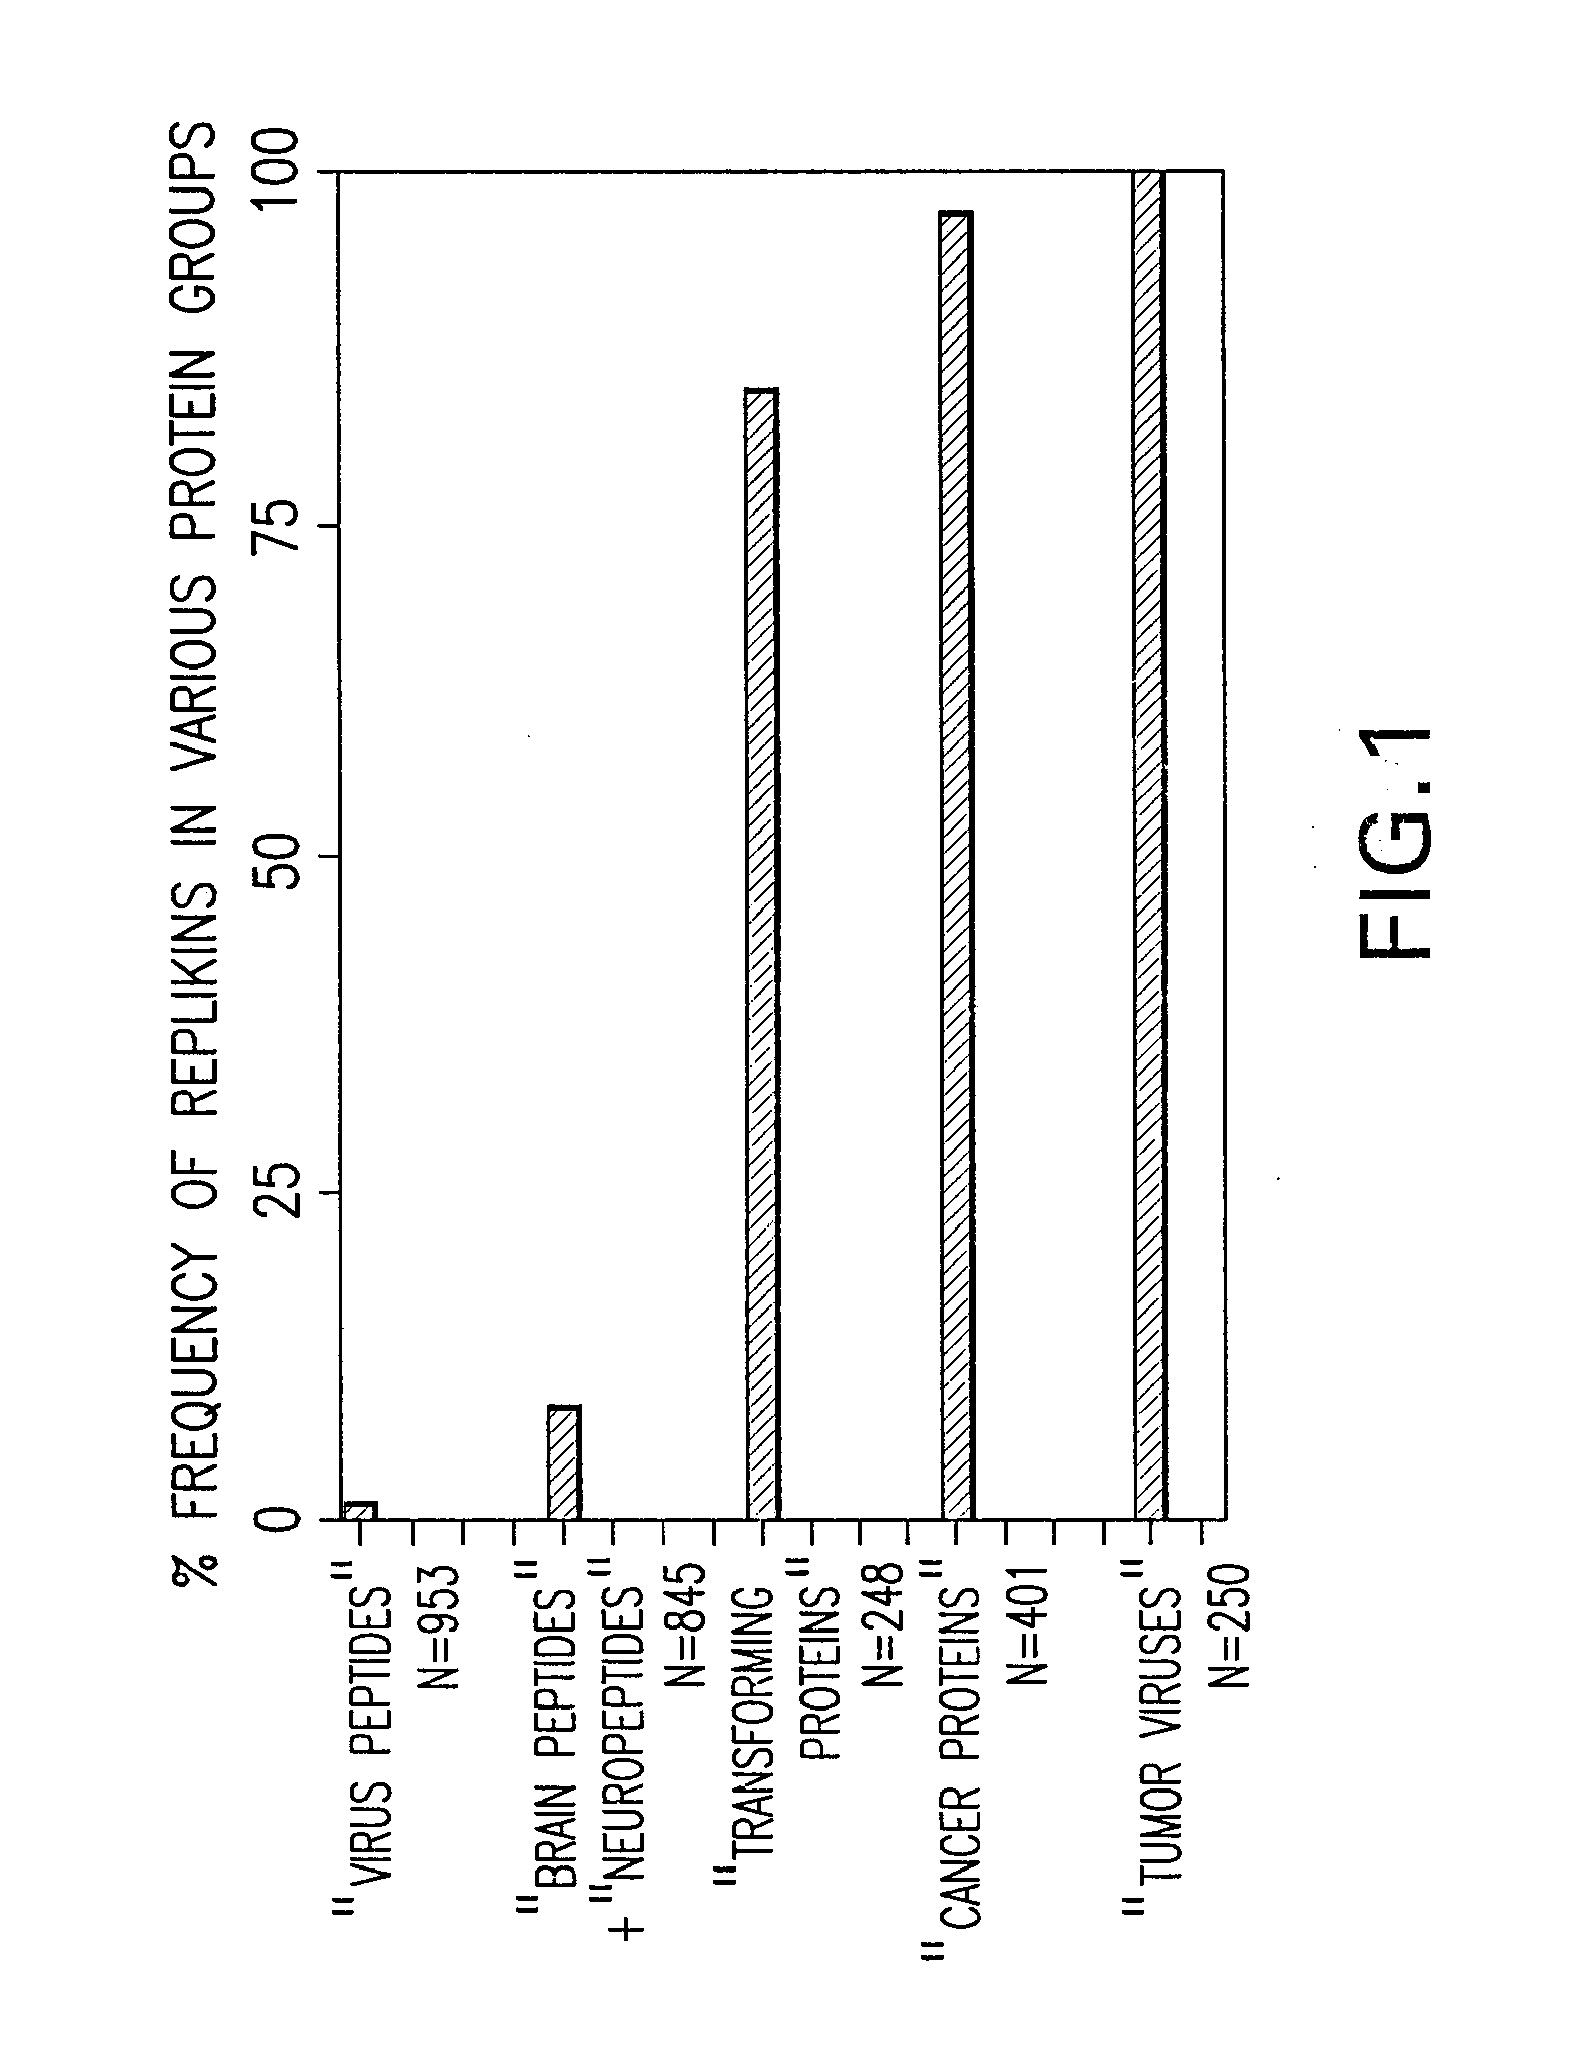 Systems and methods for identifying replikin scaffolds and uses of said replikin scaffolds